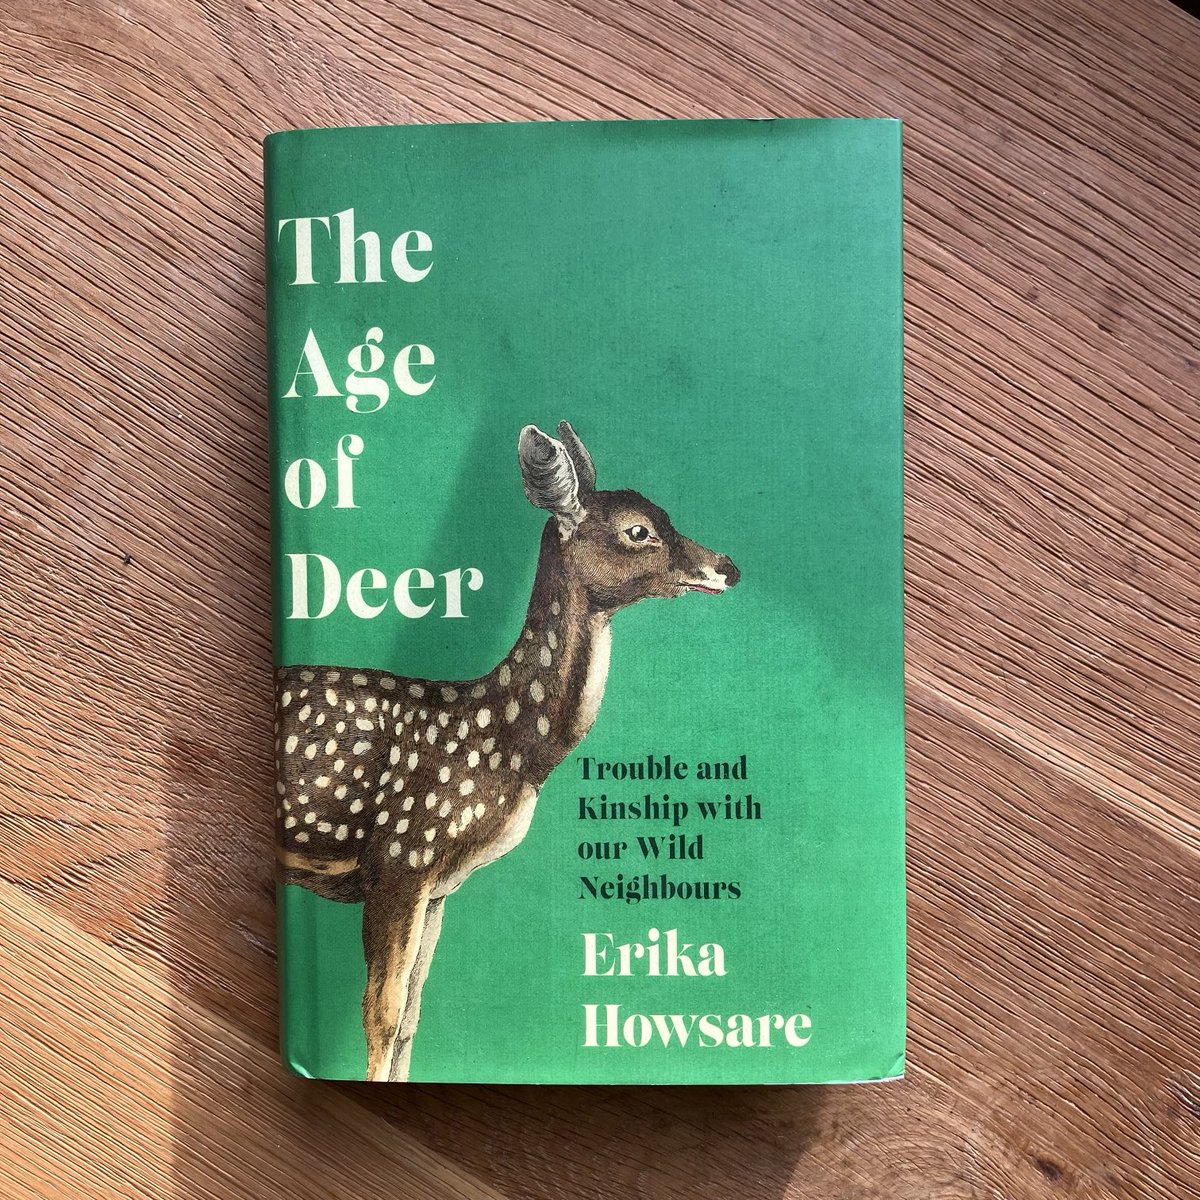 Beautiful book post day: “The Age of Deer” by Erika Howsare just came through my letterbox. I was lucky enough to edit a gorgeous piece by Erika in Dark Mountain 20. Reading her words on wild animals and kinship will be an absolute joy.

#creativenonfiction #environmentalwriting